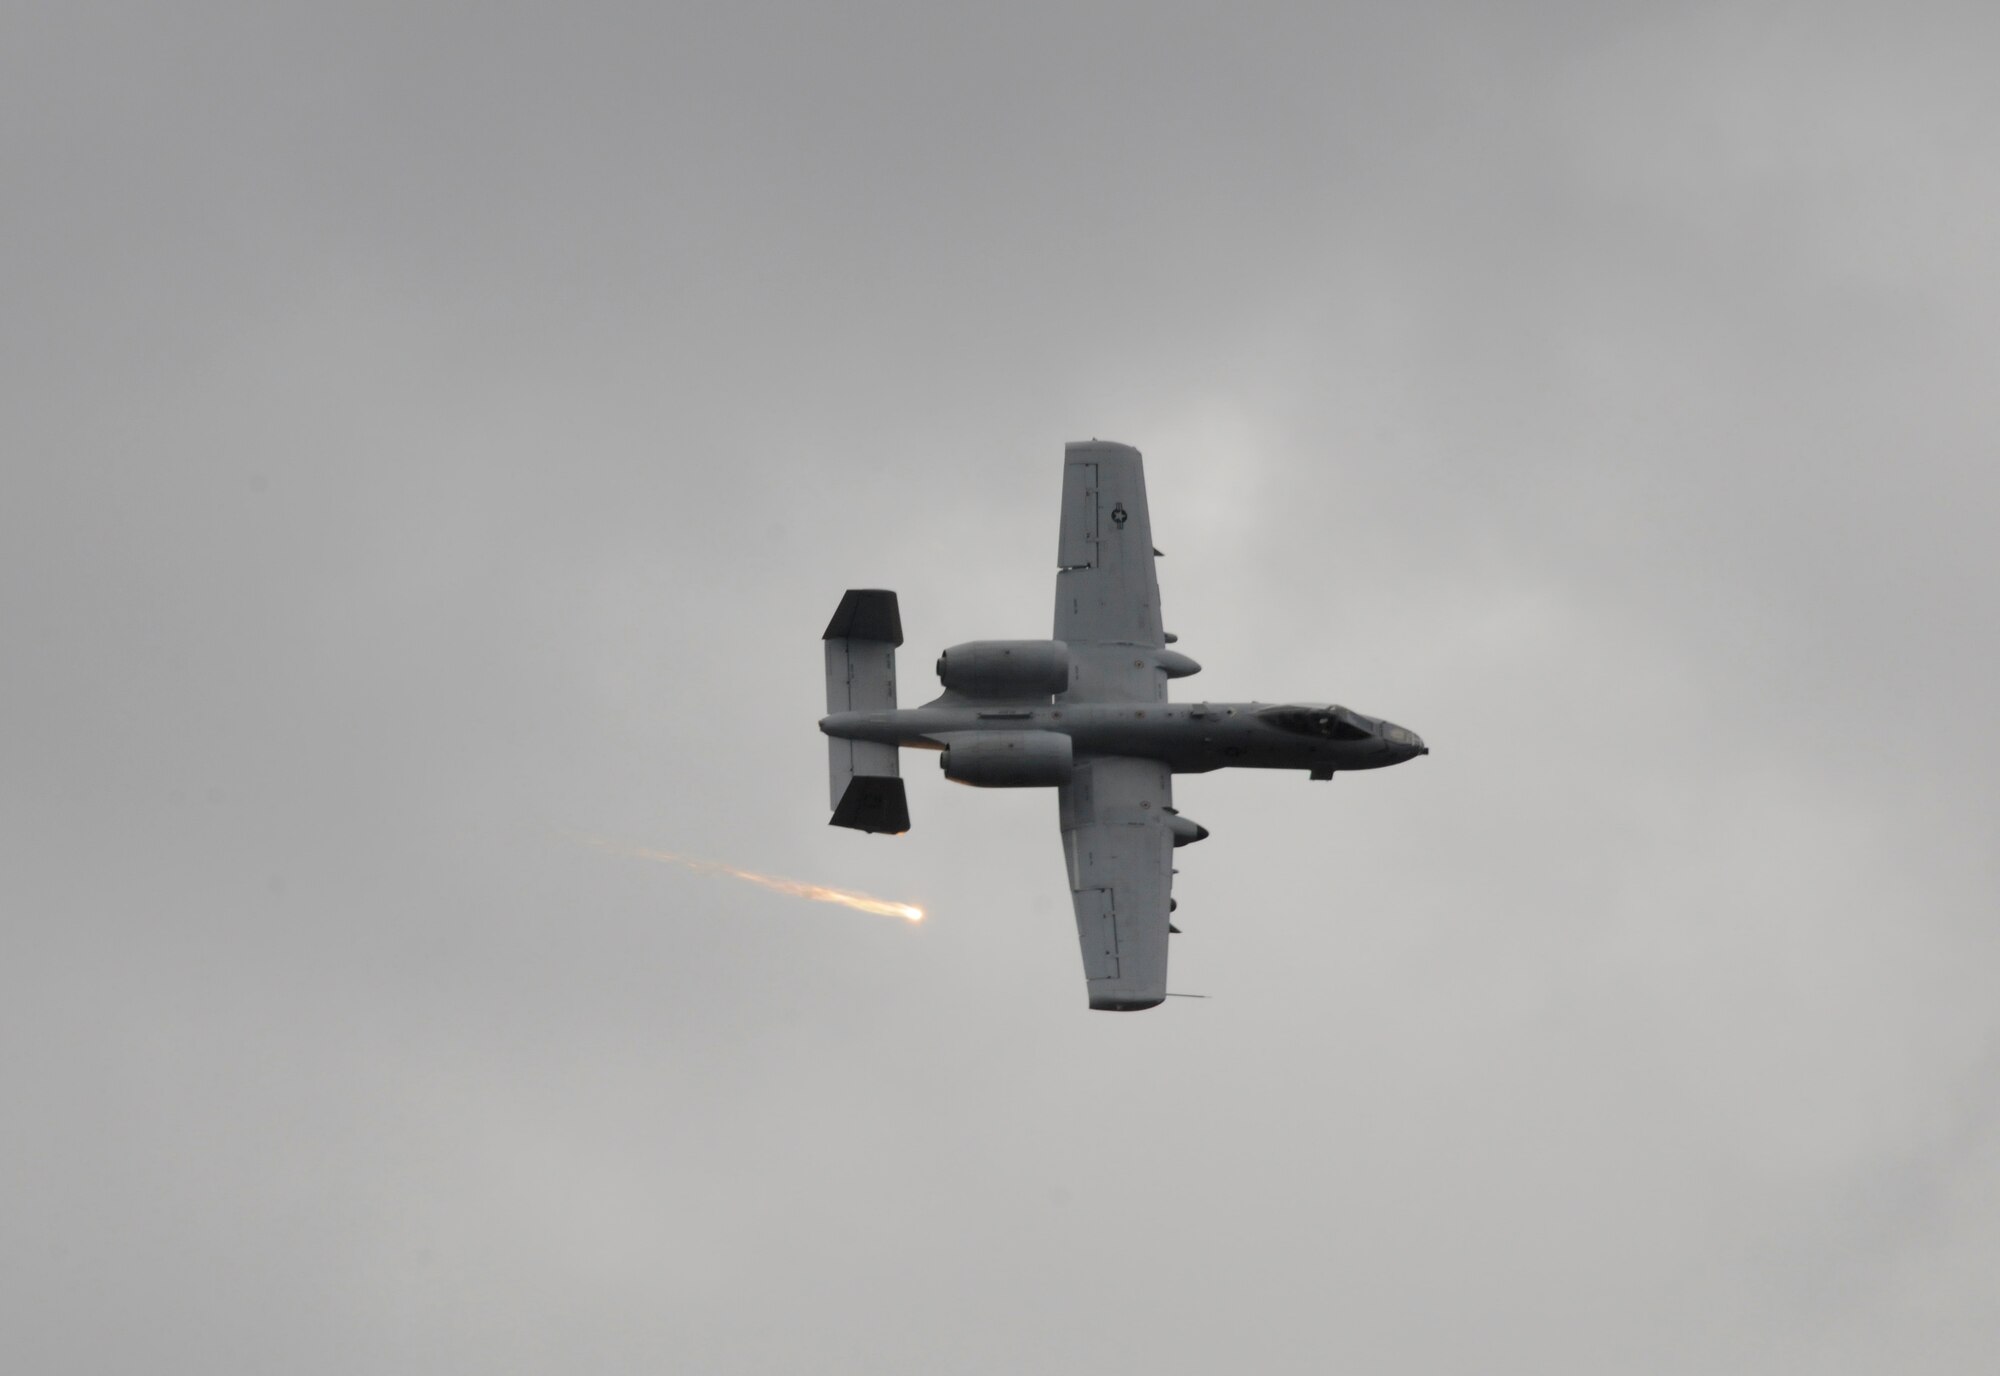 An A-10C Thunderbolt II “Warthog” with the 188th Fighter Wing, Arkansas Air National Guard conducts a strafing run at the 188th’s Detachment 1 Razorback Range during a Close-Air Support (CAS) training exercise with Joint Terminal Attack Controllers (JTACs). The JTACs are members of the19th Air Support Operations Squadron based in Fort Campbell, Ky. Razorback Range, located at Fort Chaffee Maneuver Training Center, Ark., is a key asset and currently is the best among all Air National Guard units nationwide in terms of proximity to the wing. Razorback Range’s proximity to Ebbing Air National Guard Base allows the 188th’s A-10s to be on the range just two minutes after takeoff, which makes the unit the most efficient A-10 wing in the ANG in terms of training costs. (U.S. Air Force photo by Capt. Heath Allen/188th Fighter Wing Public Affairs)